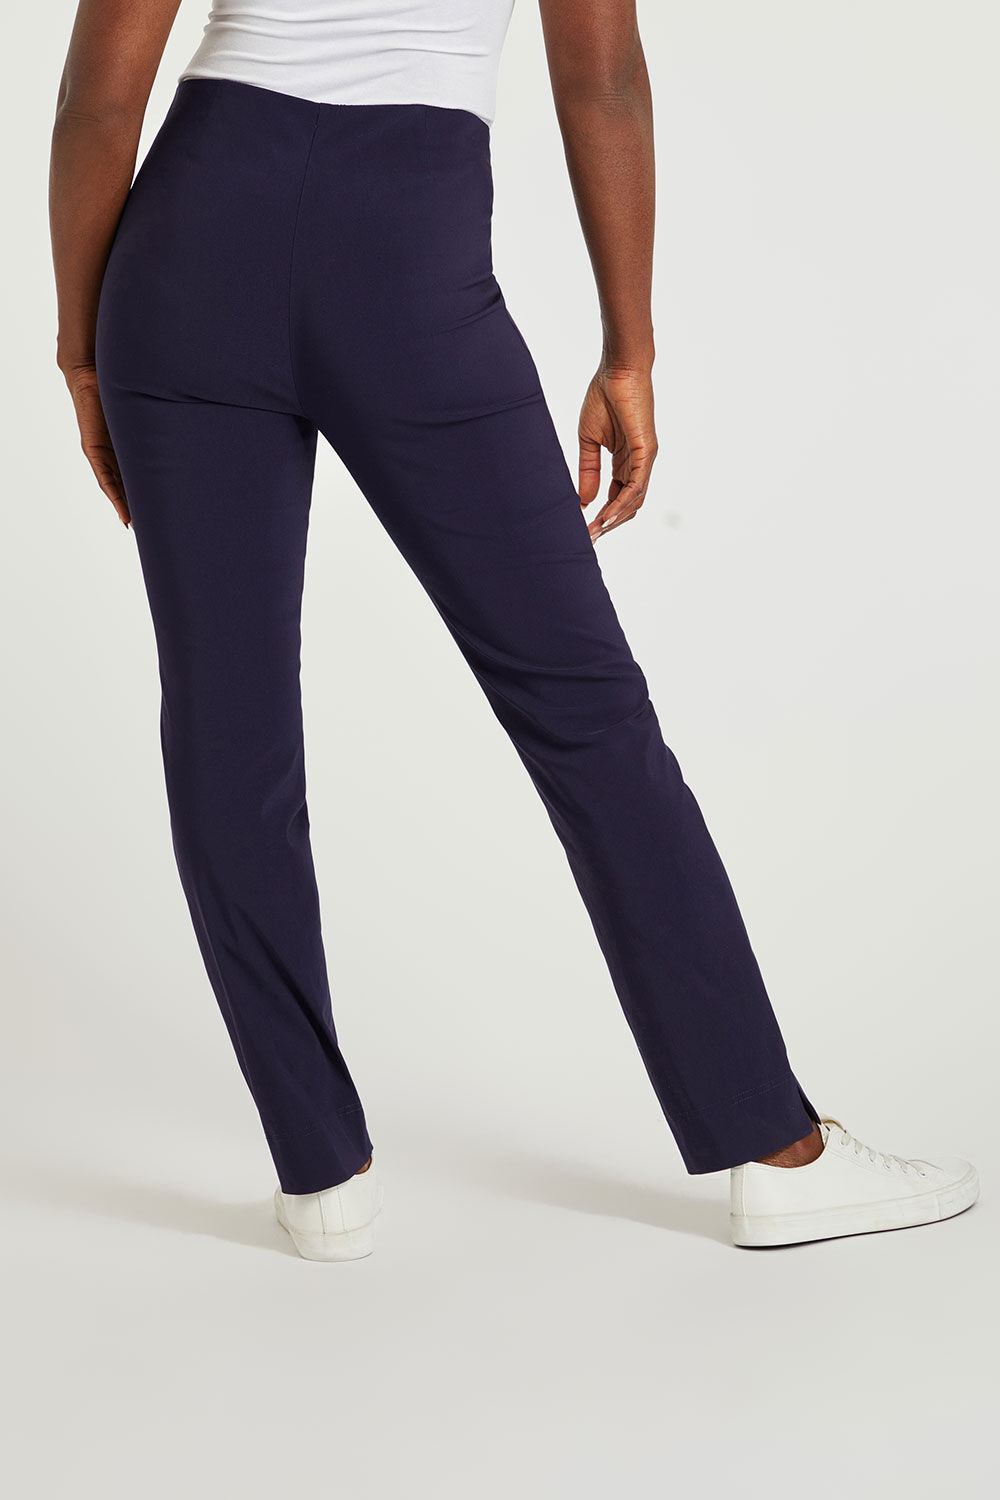 Womens Crepe Stretchy Tapered Fit Salon Trousers Violet  SHOP ALL  WORKWEAR from Simon Jersey UK